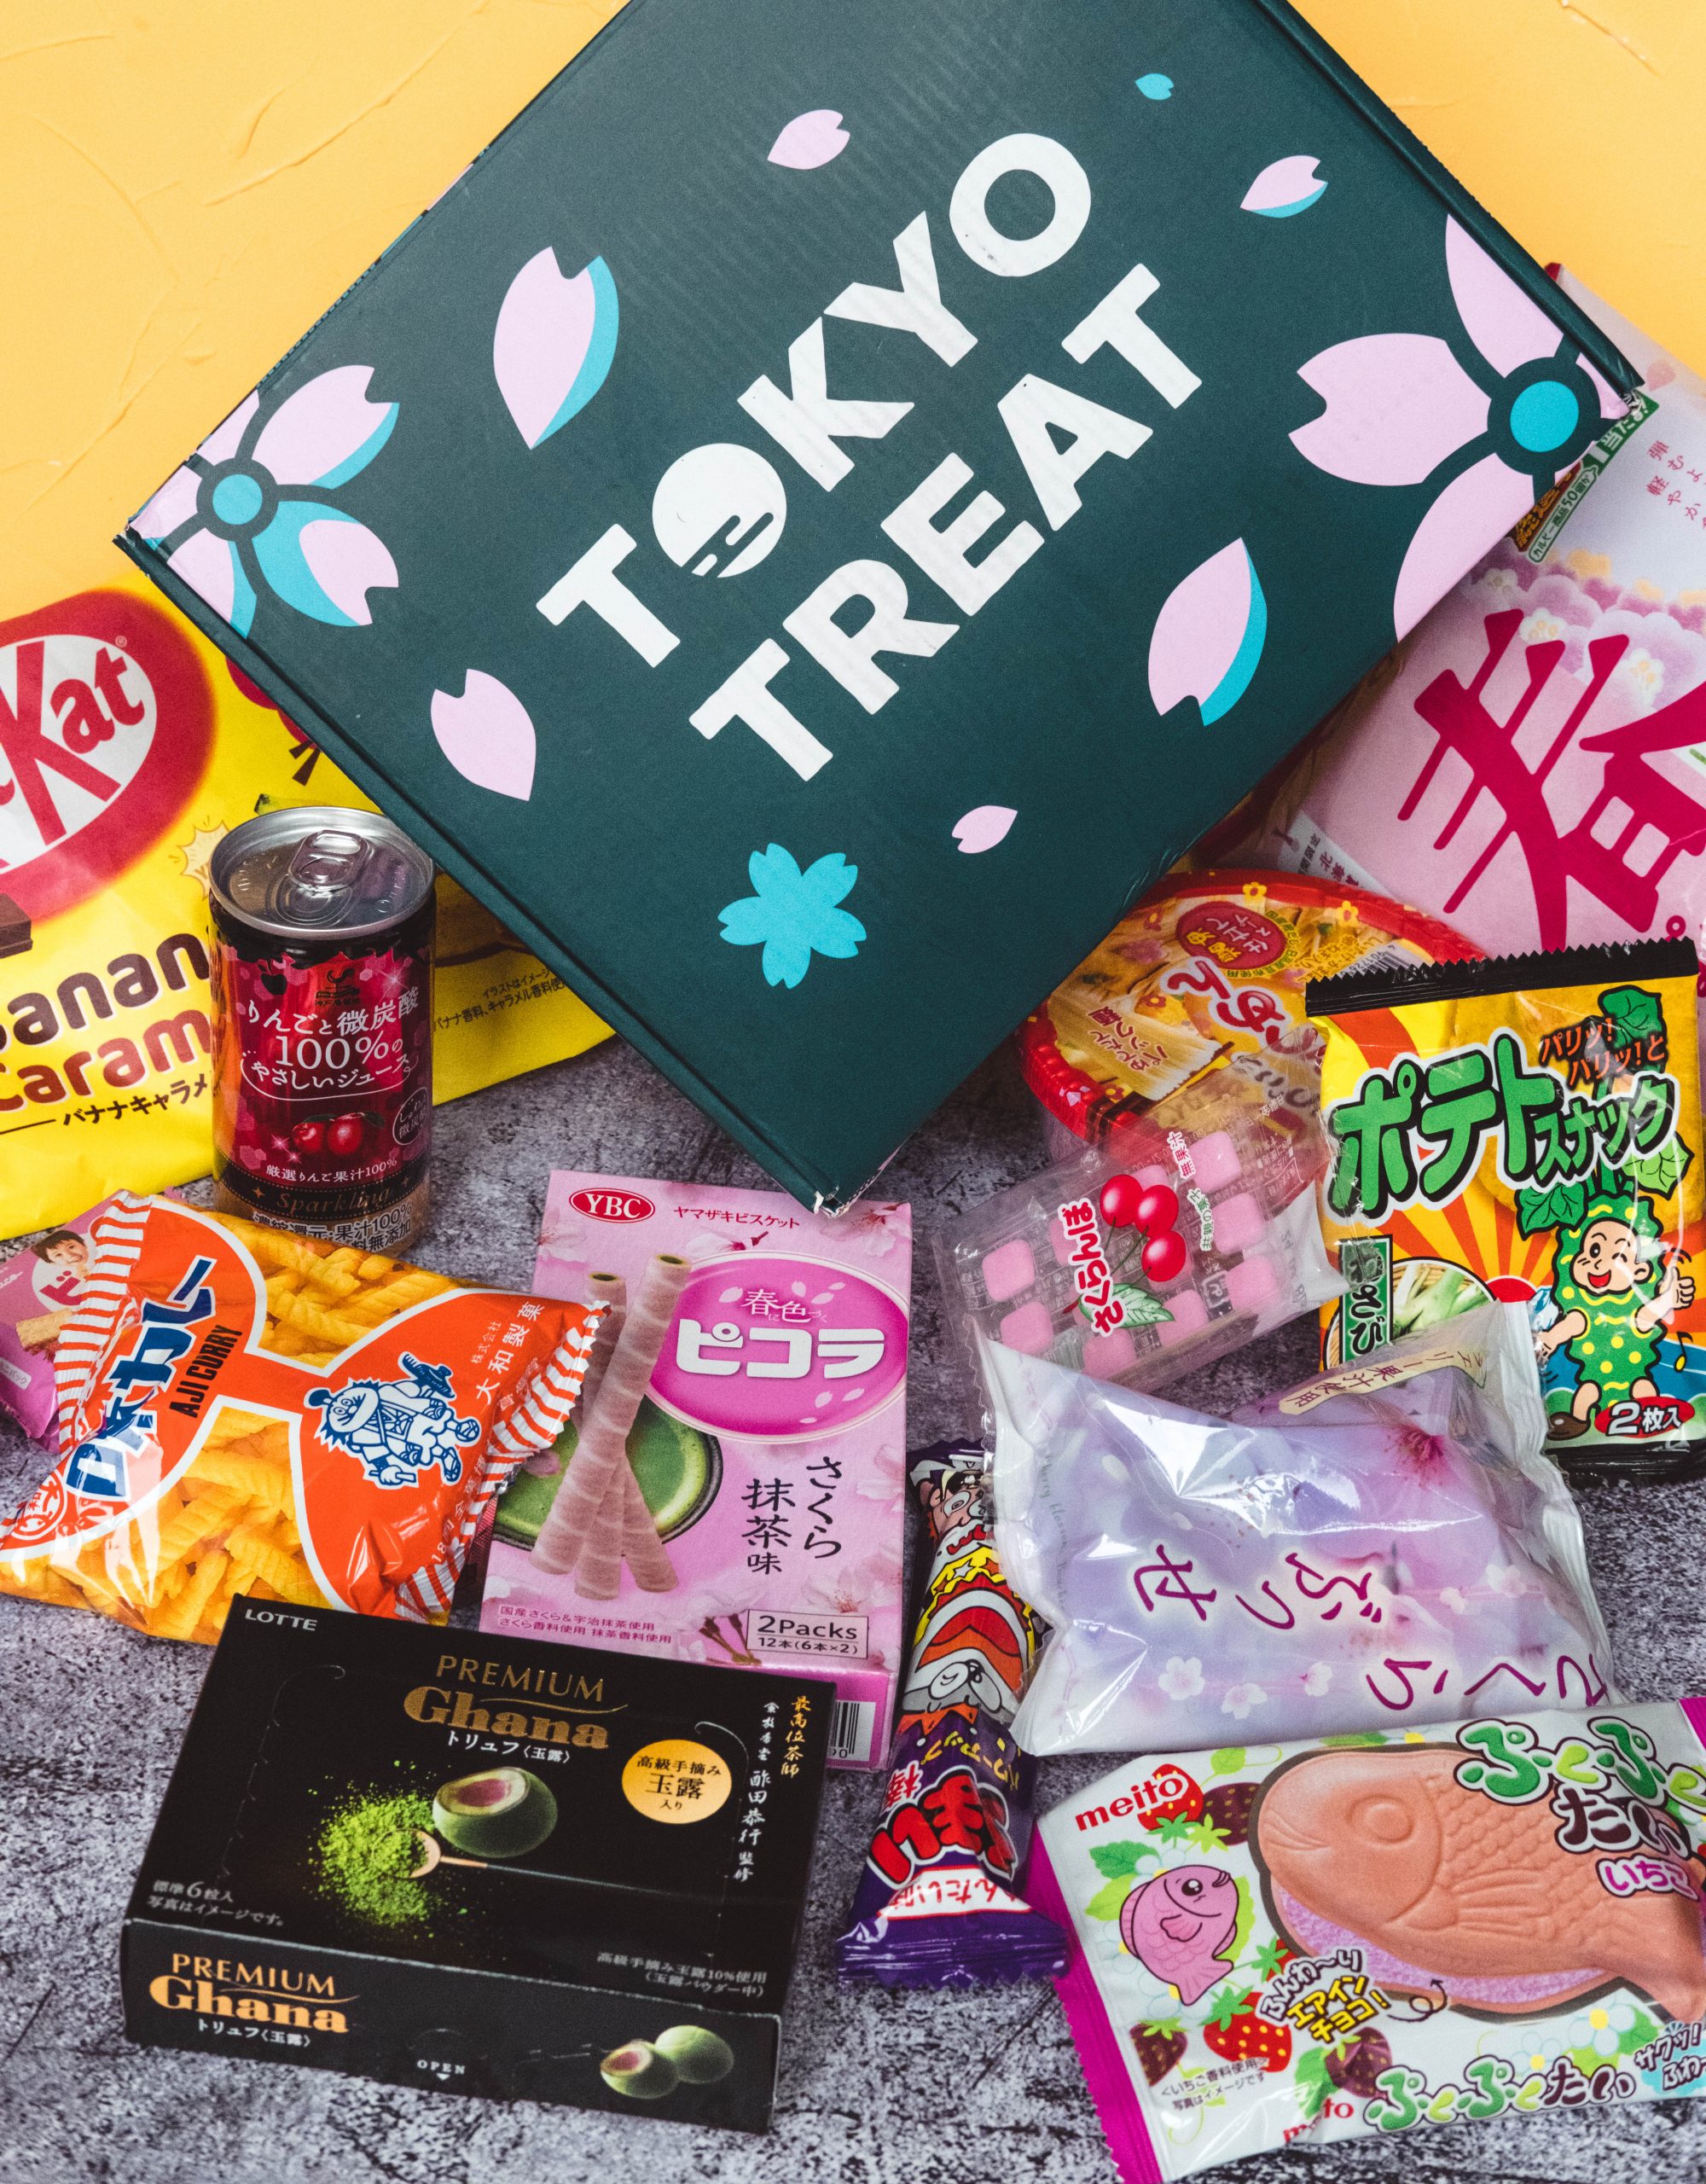 What is in the Tokyo Treat box